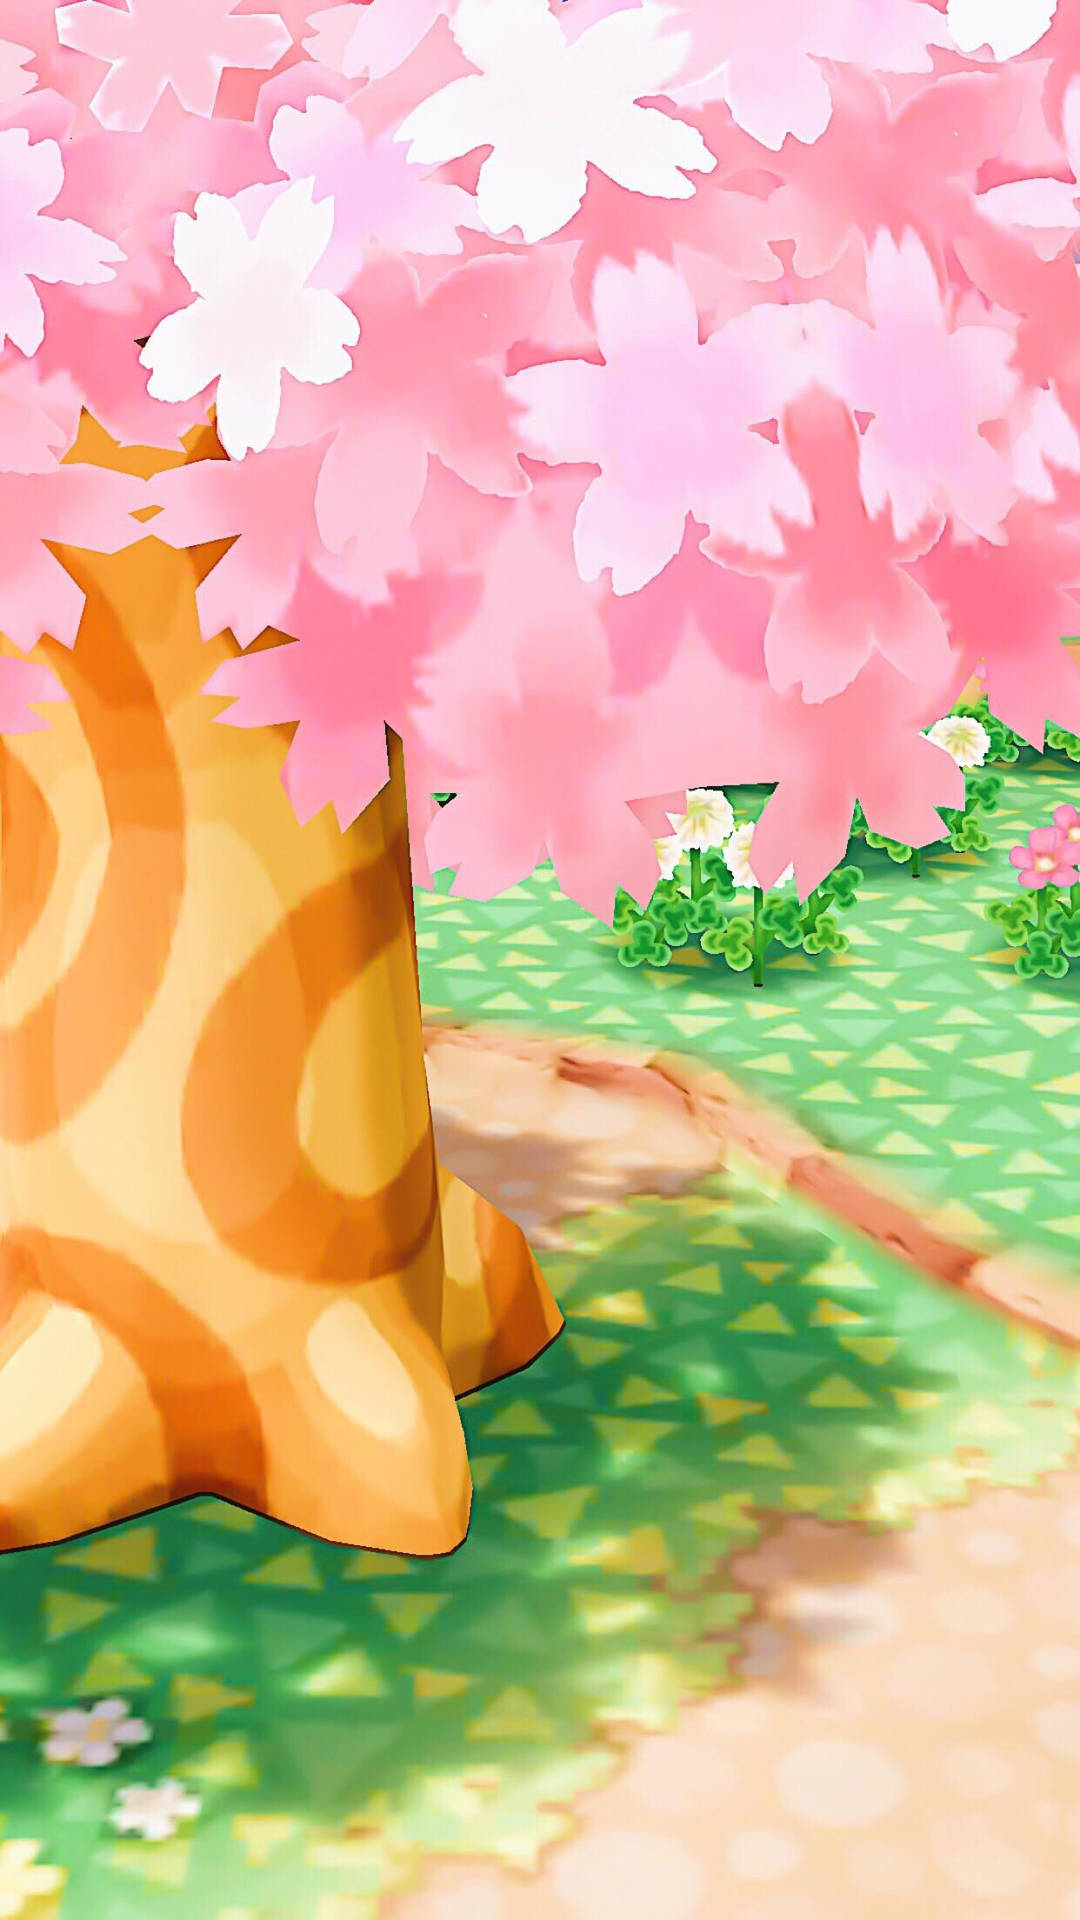 A blossoming tree in the world of Animal Crossing Wallpaper